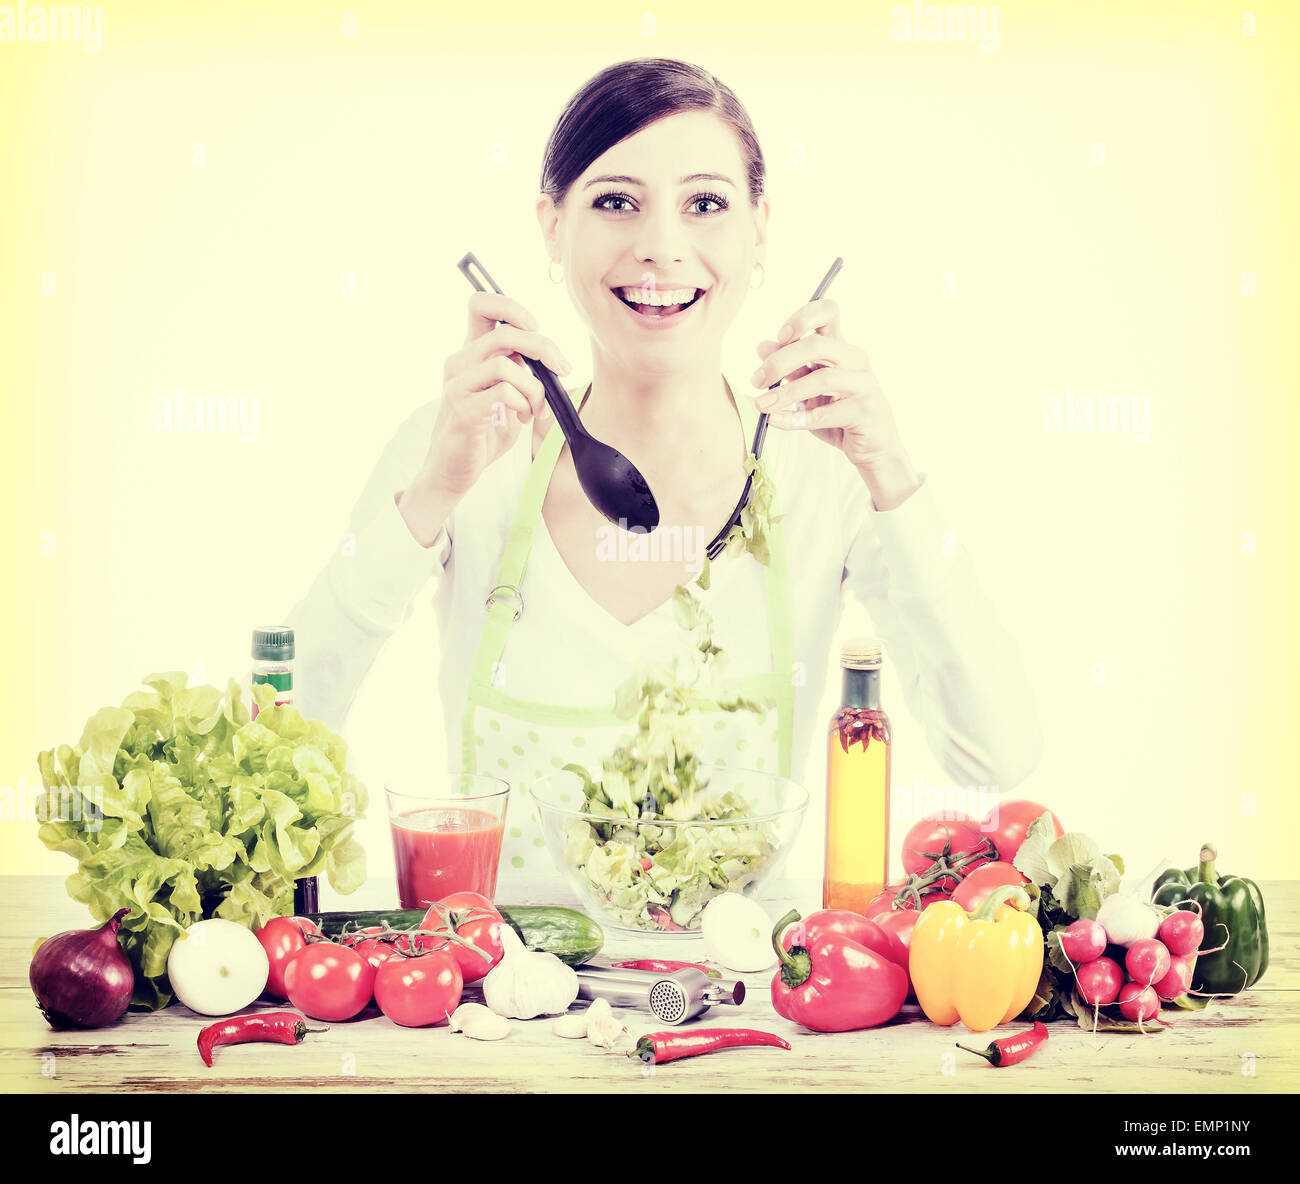 Retro filtered photo of a happy housewife preparing salad, healthy food or diet concept. Stock Photo